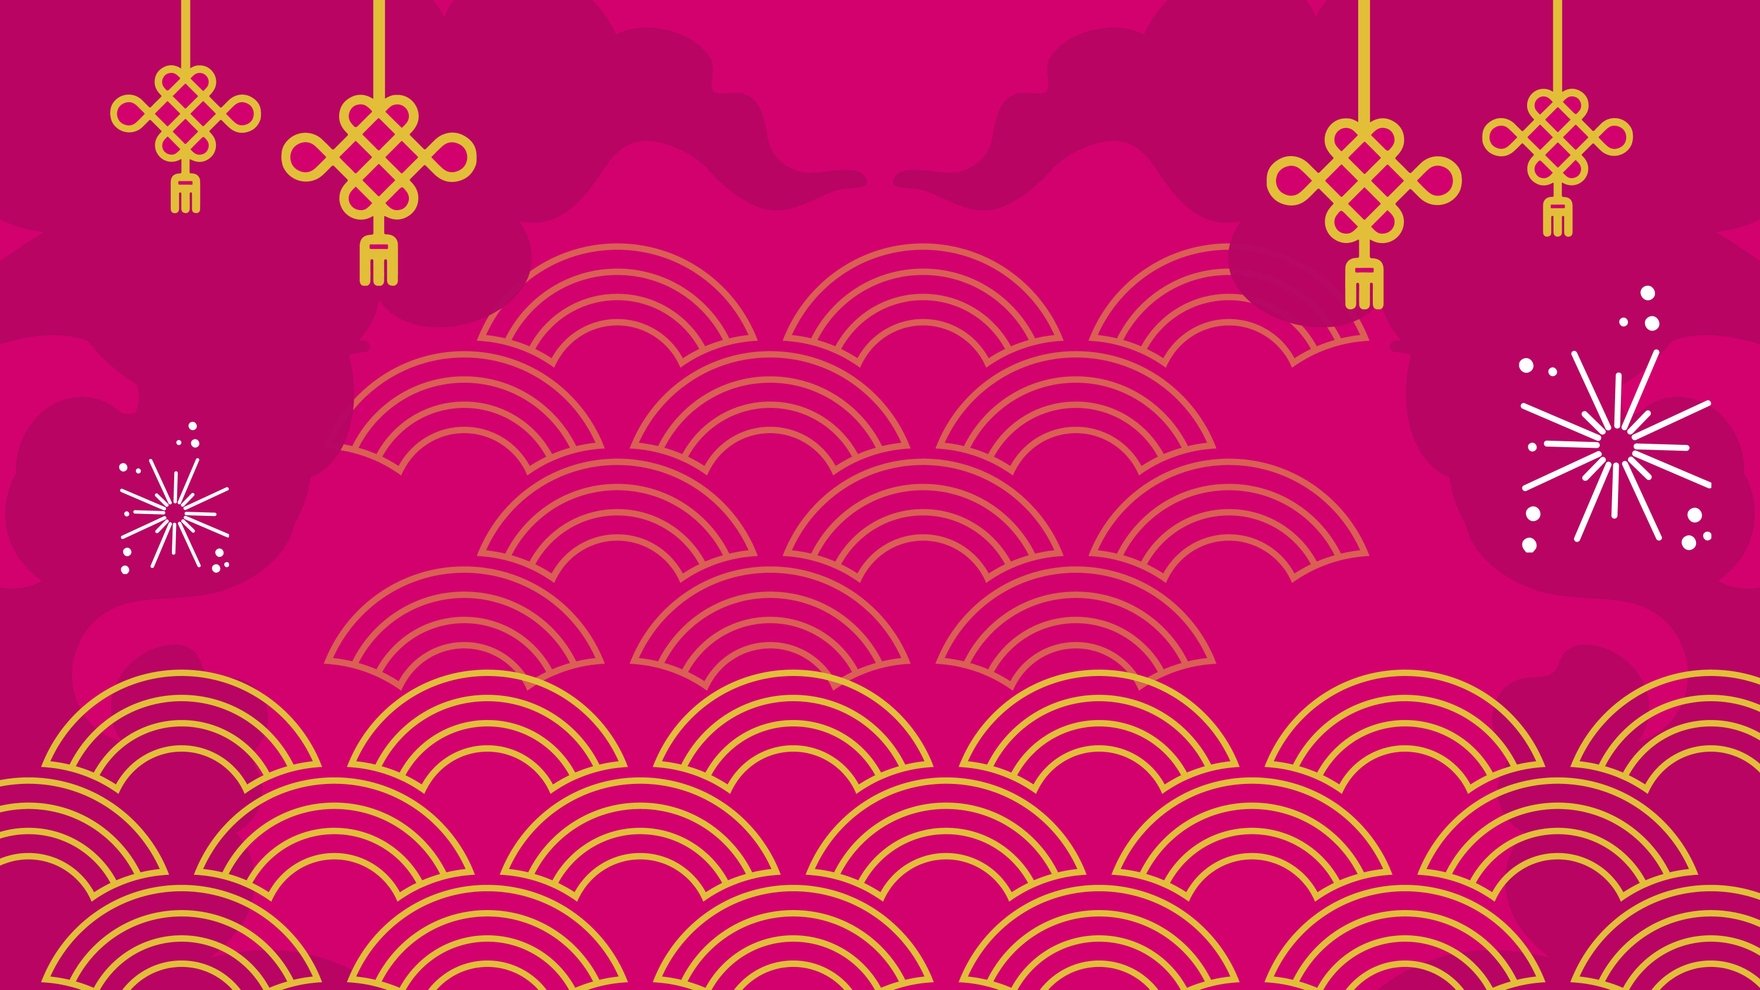 Free Chinese New Year Abstract Background - EPS, Illustrator, JPG, PSD,  PNG, PDF, SVG 